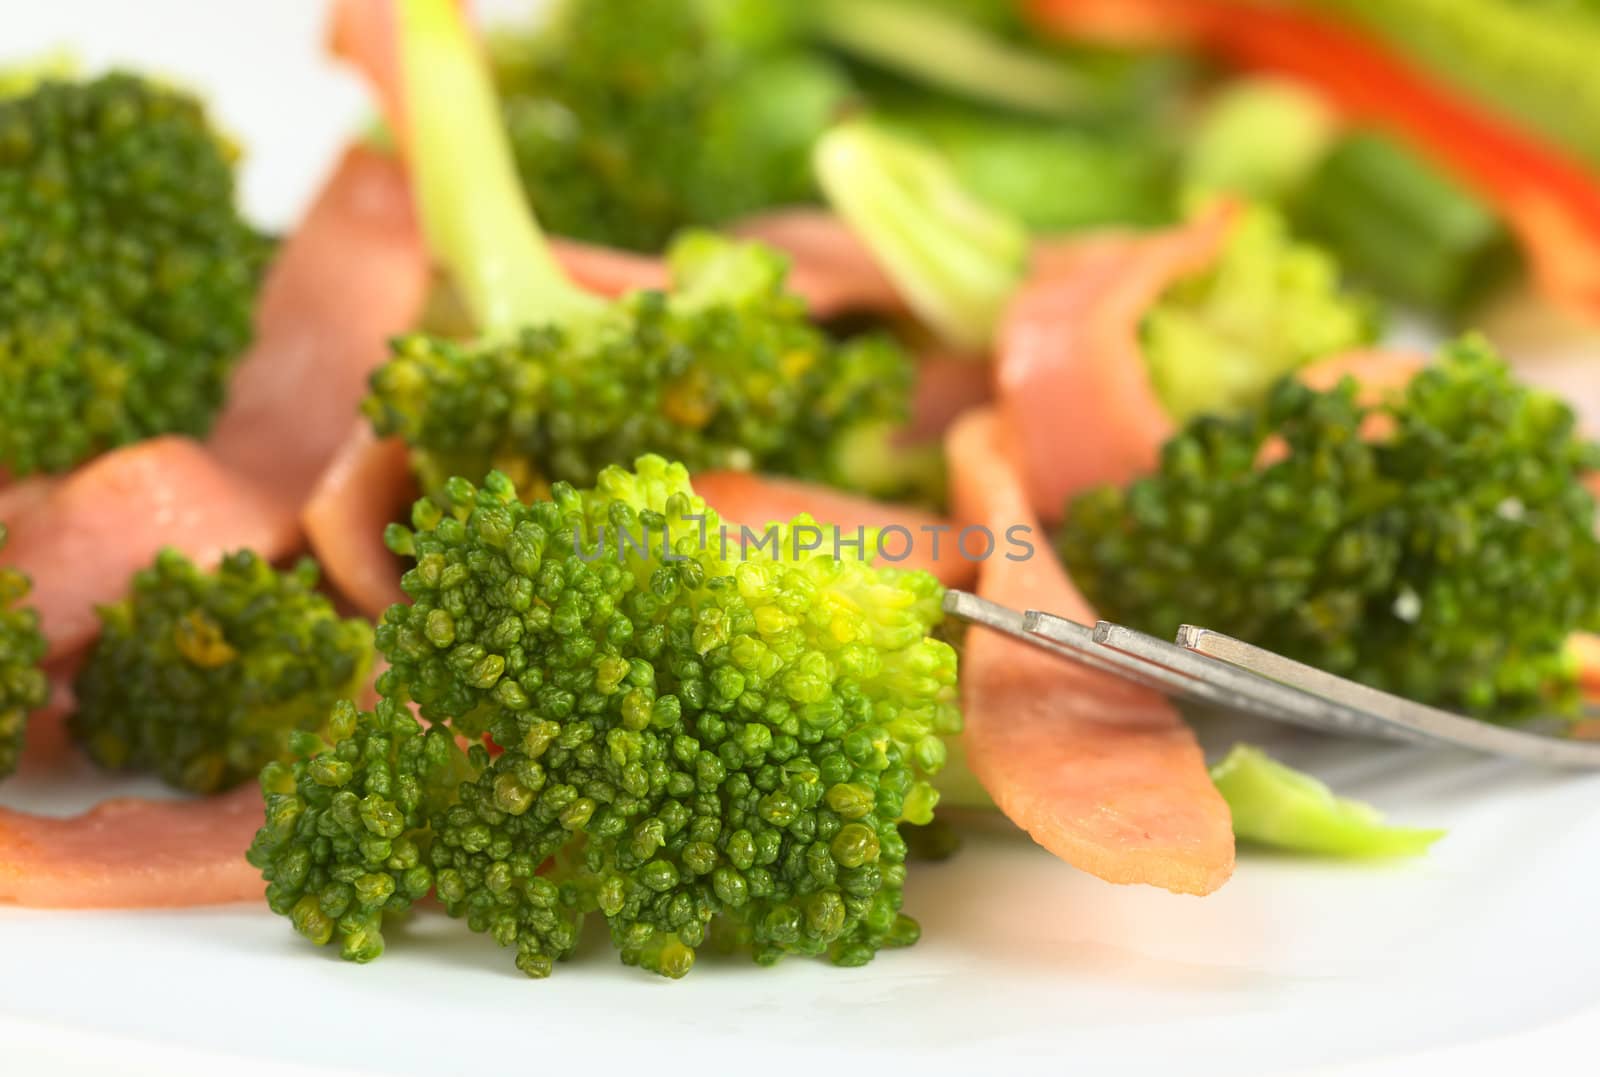 Fresh broccoli-ham salad with a fork on the side (Selective Focus, Focus on the broccoli floret in the front)